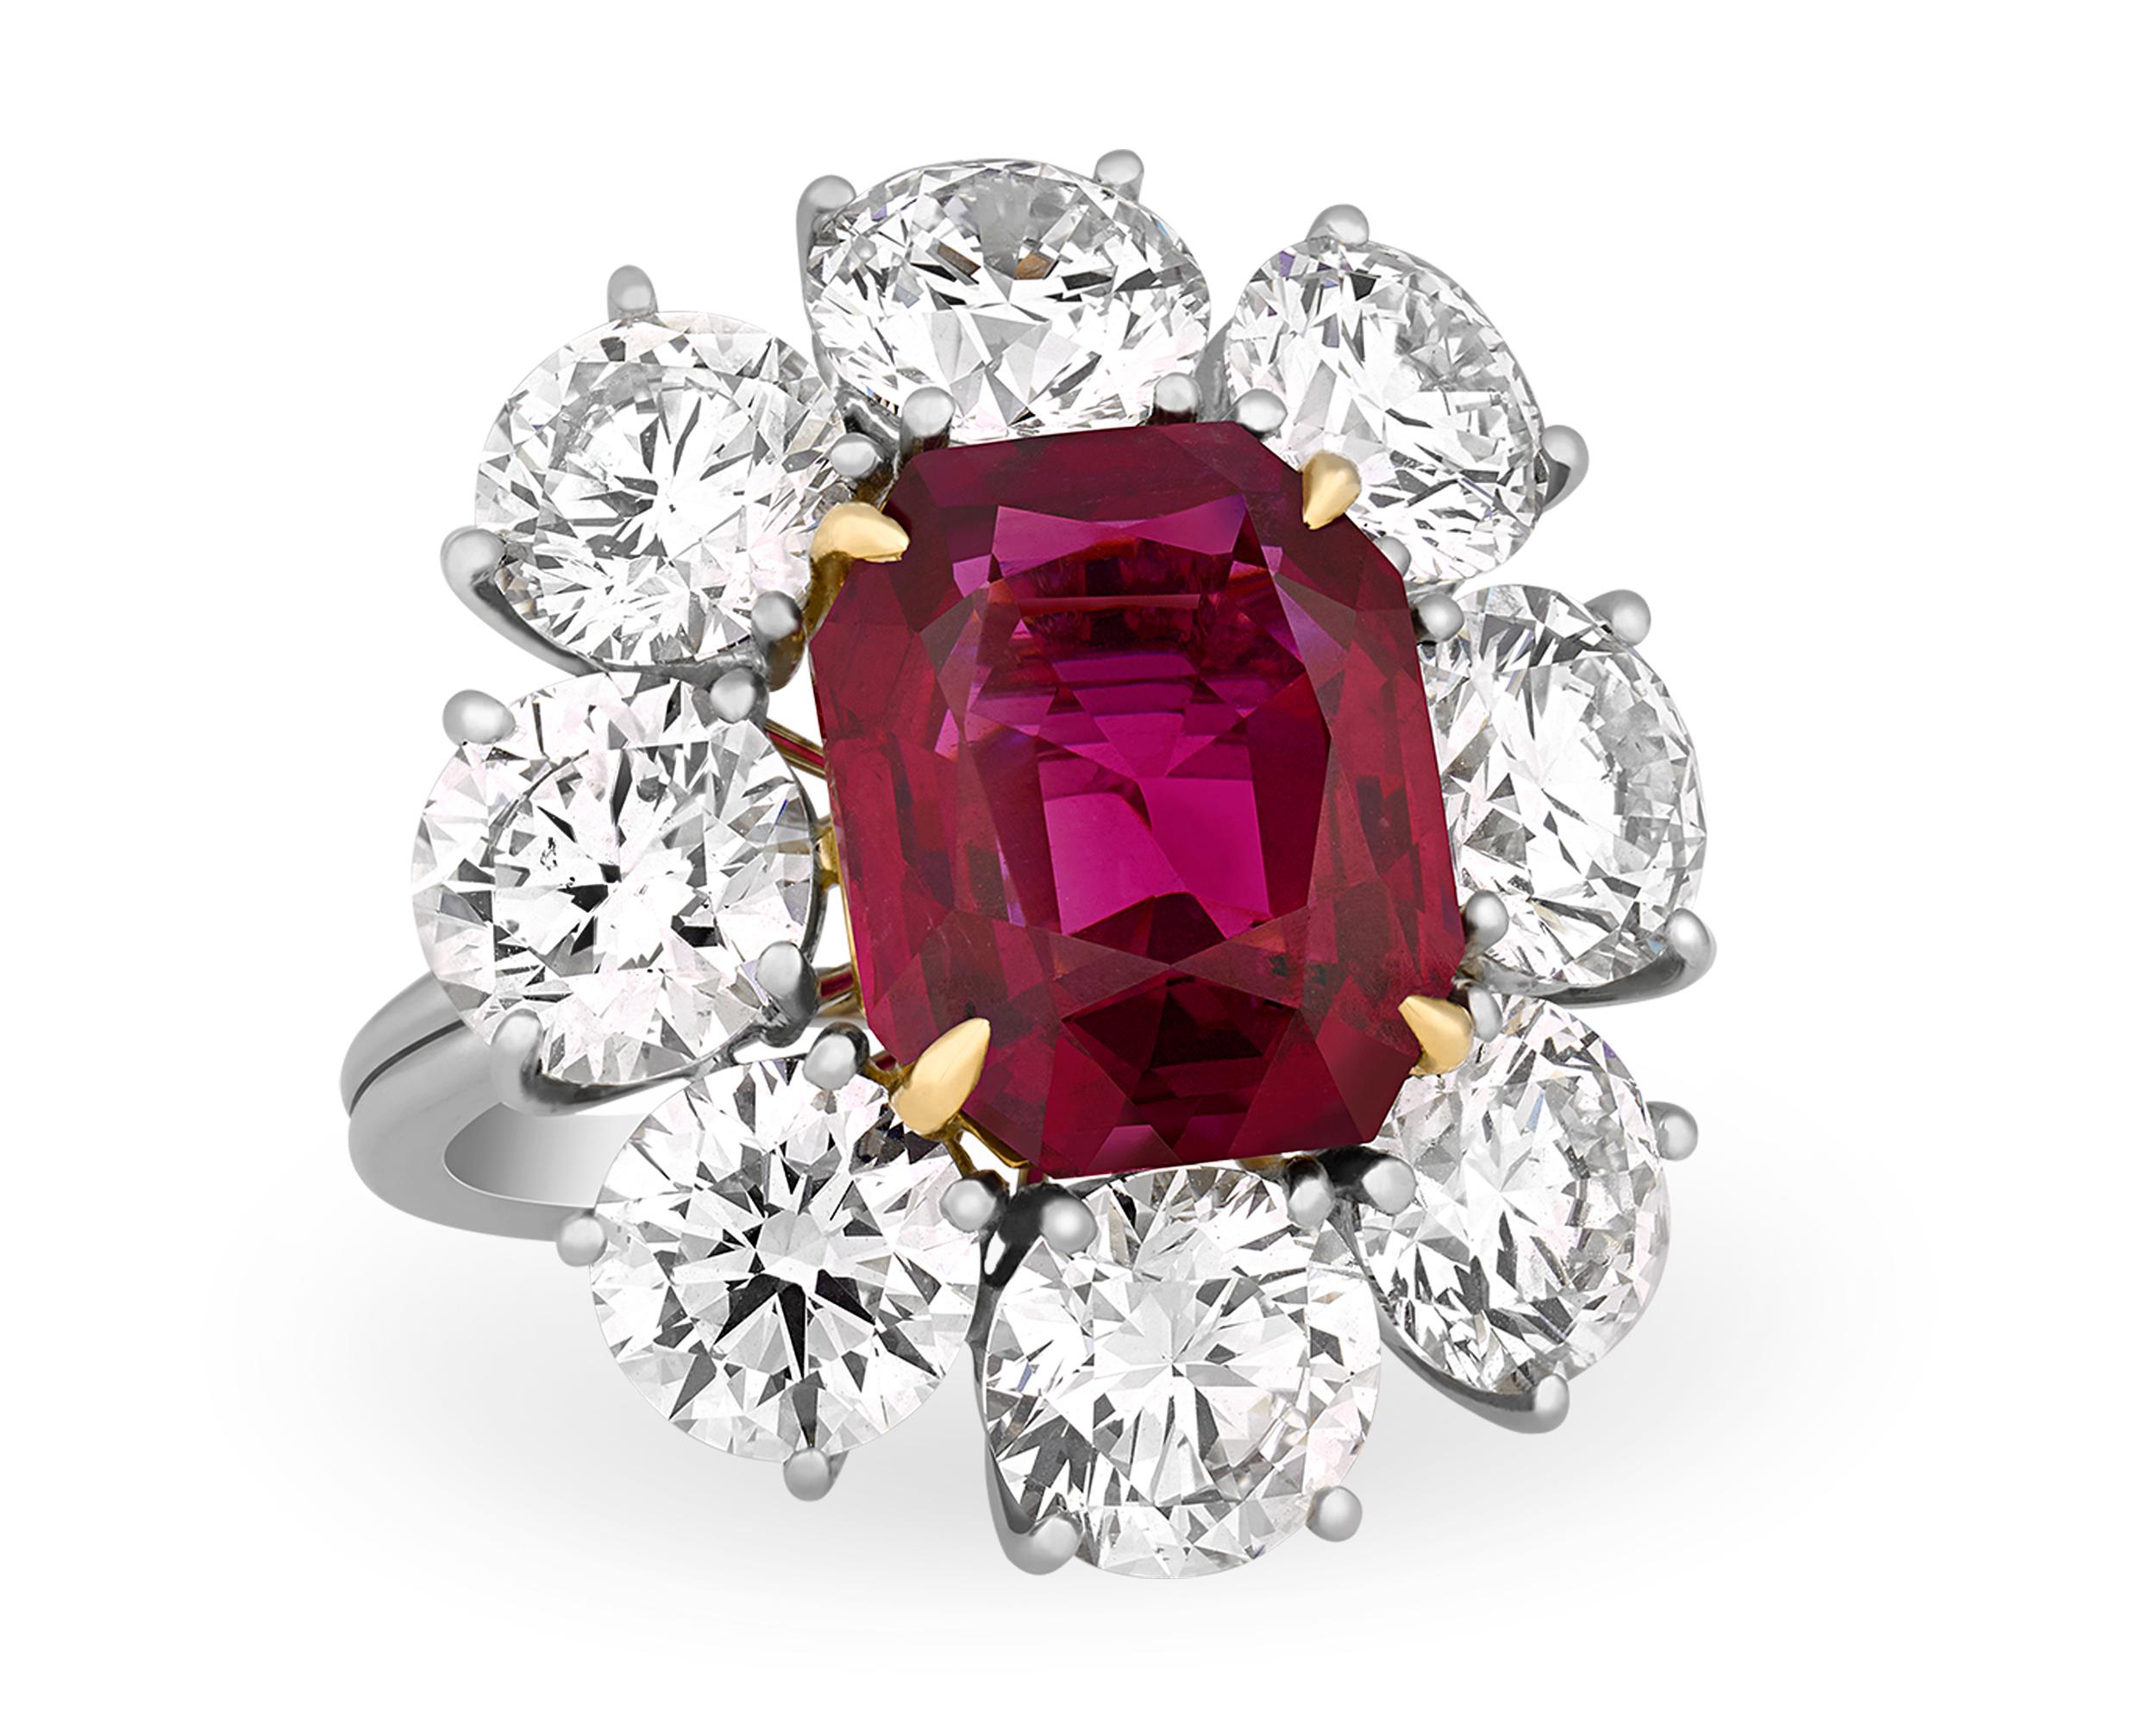 A stunning mixed-cut octagonal ruby weighing 7.37 carats lies at the center of this sophisticated ring from the renowned jewelry firm Bulgari. This gem is certified by the American Gemological Laboratories as being Burmese in origin and completely